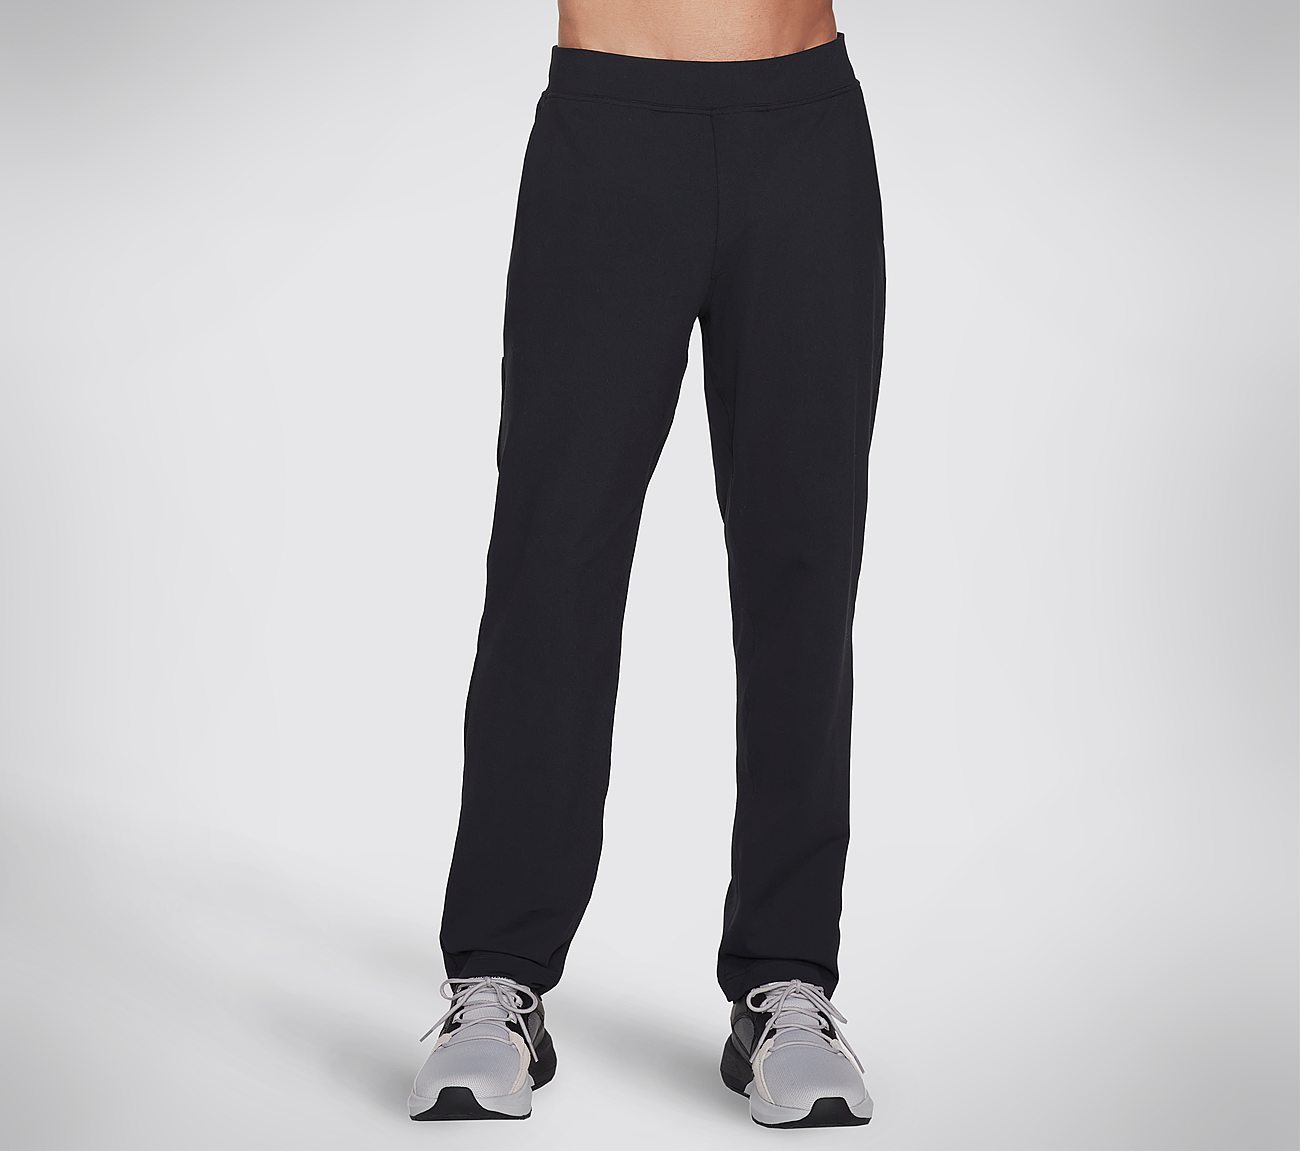 THE GOWALK PANT RECHARGE, BBBBLACK Apparel Lateral View